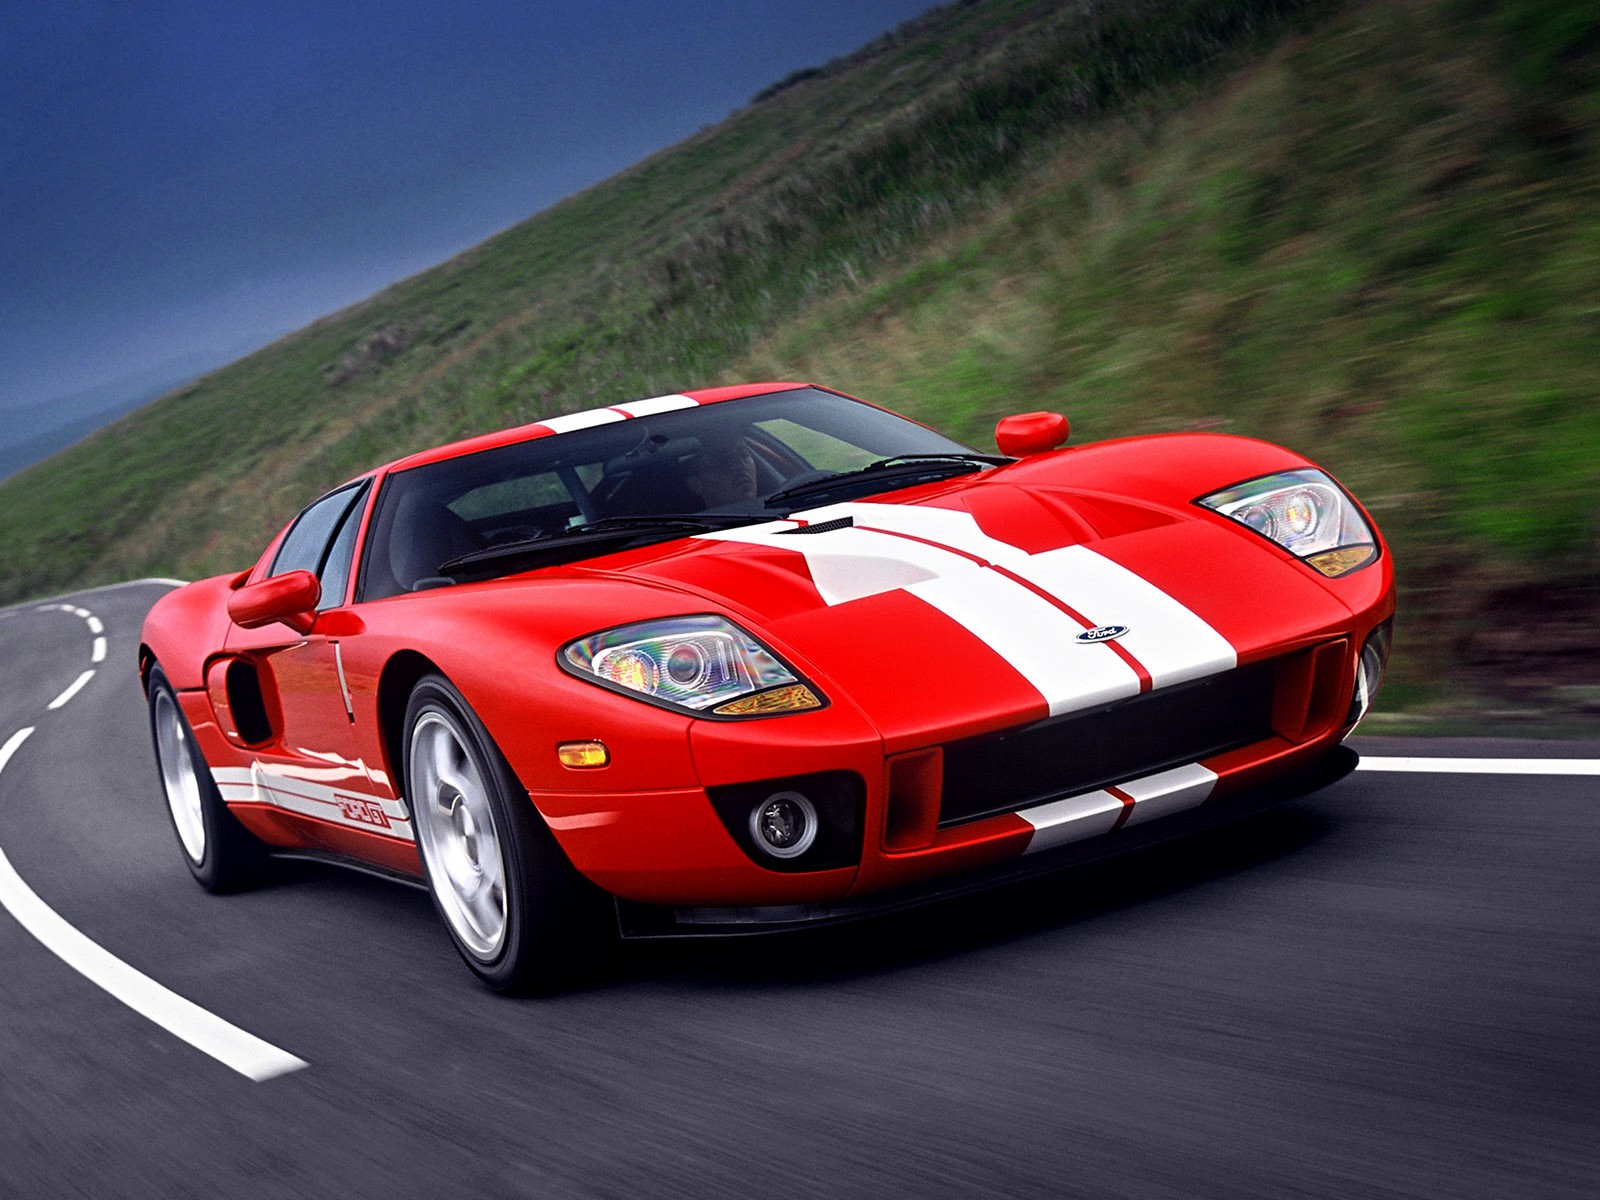 Ford Gt Wallpaper Image